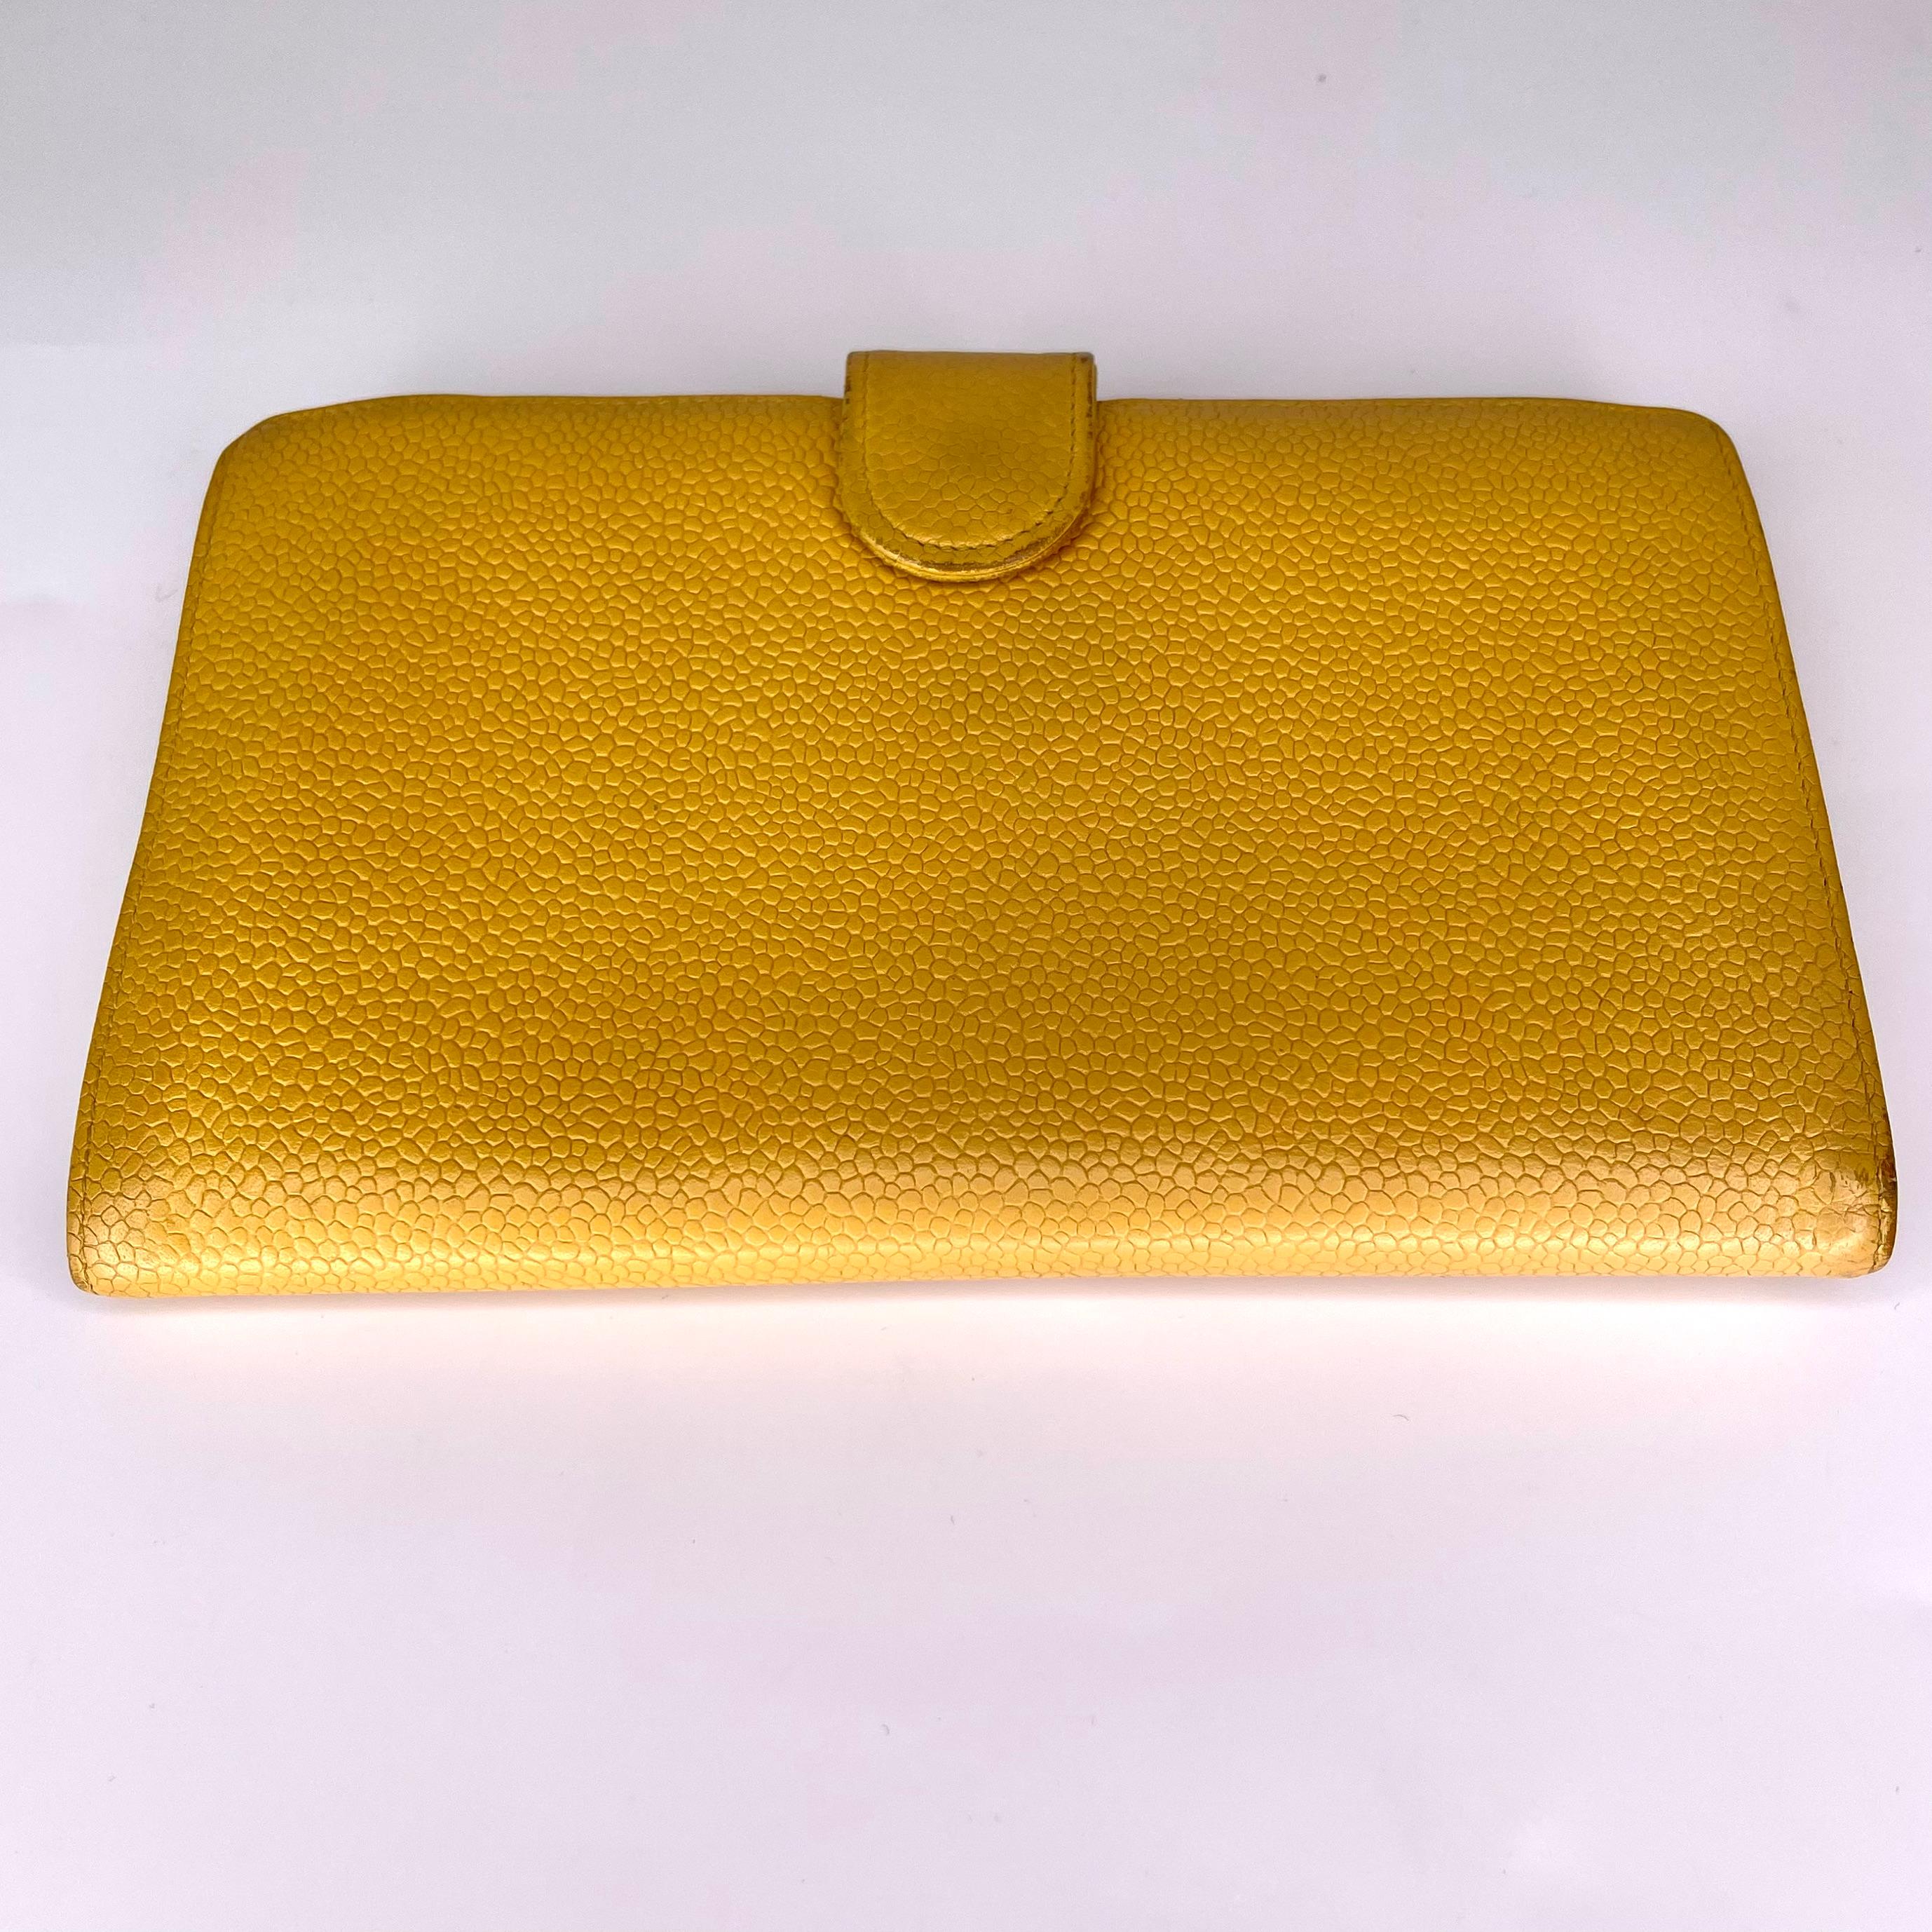 Chanel leather wallet with six interior card holders and one pocket to hold a variety of different items. Compact and easy to use. Chanel codes starting with 5xxxxxx are manufactured from 1997-1999.

COLOR: Mustard yellow 
MATERIAL: Caviar